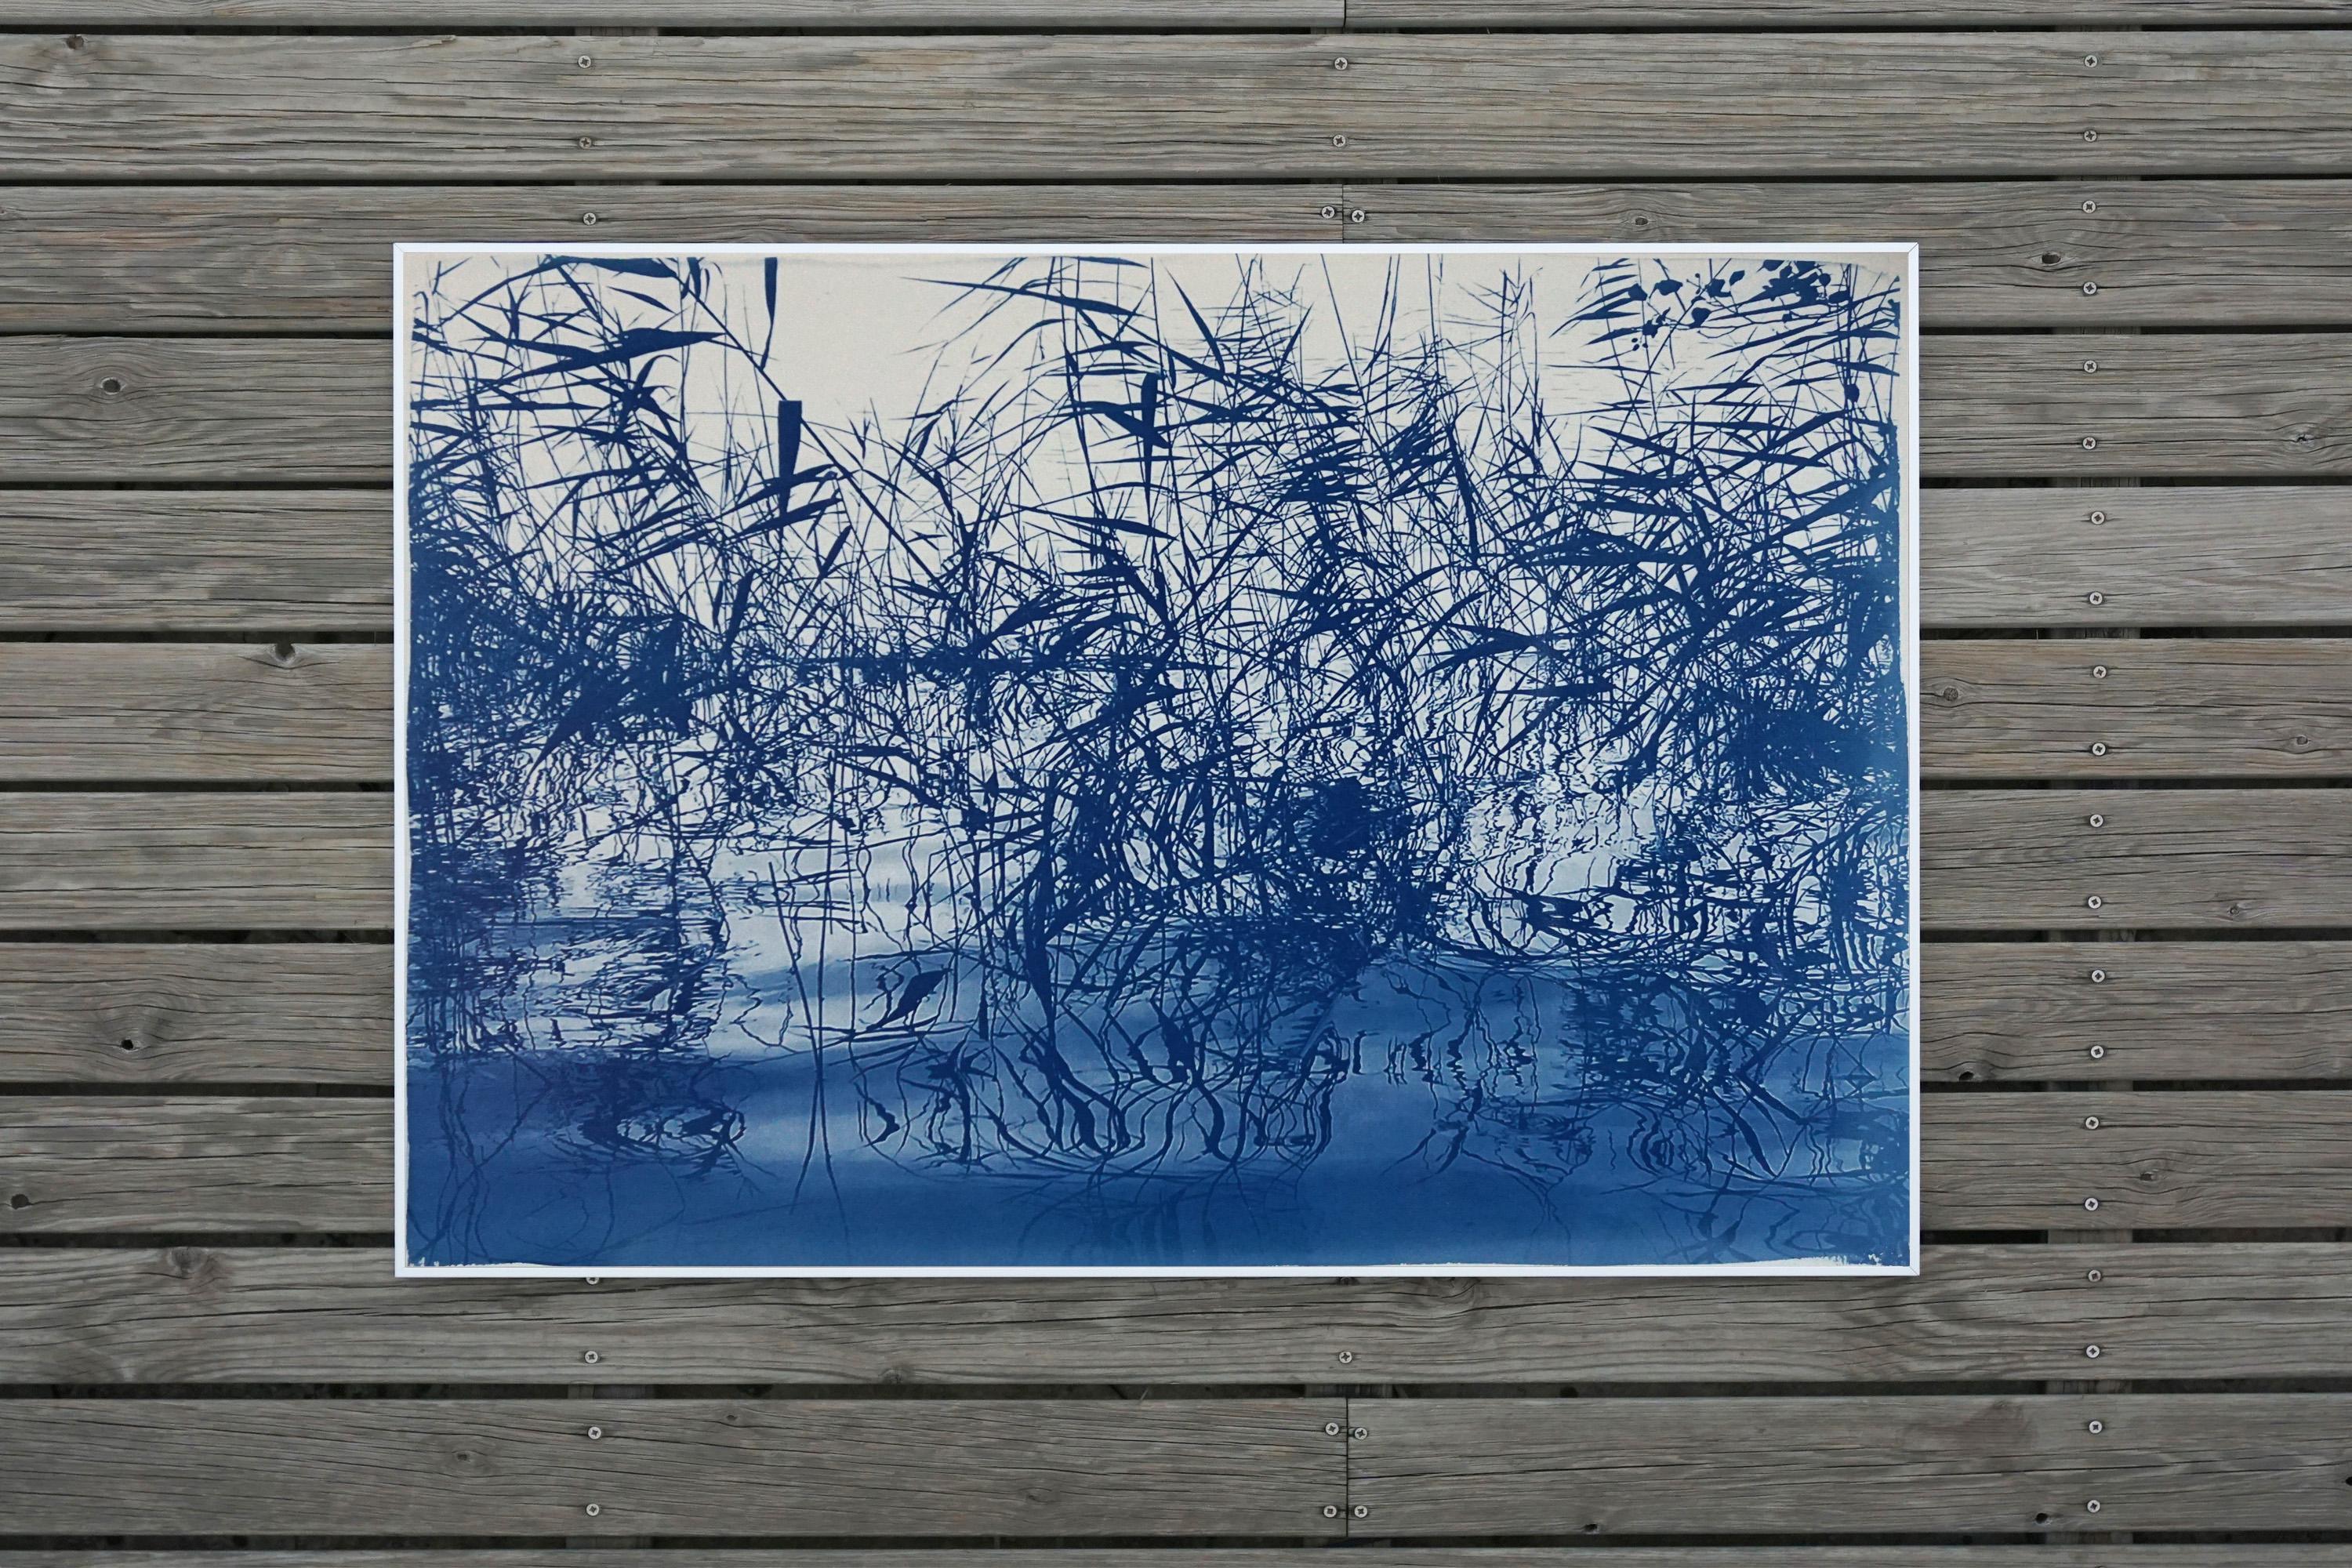 This is an exclusive handprinted limited edition cyanotype.
Exquisite landscape of a 